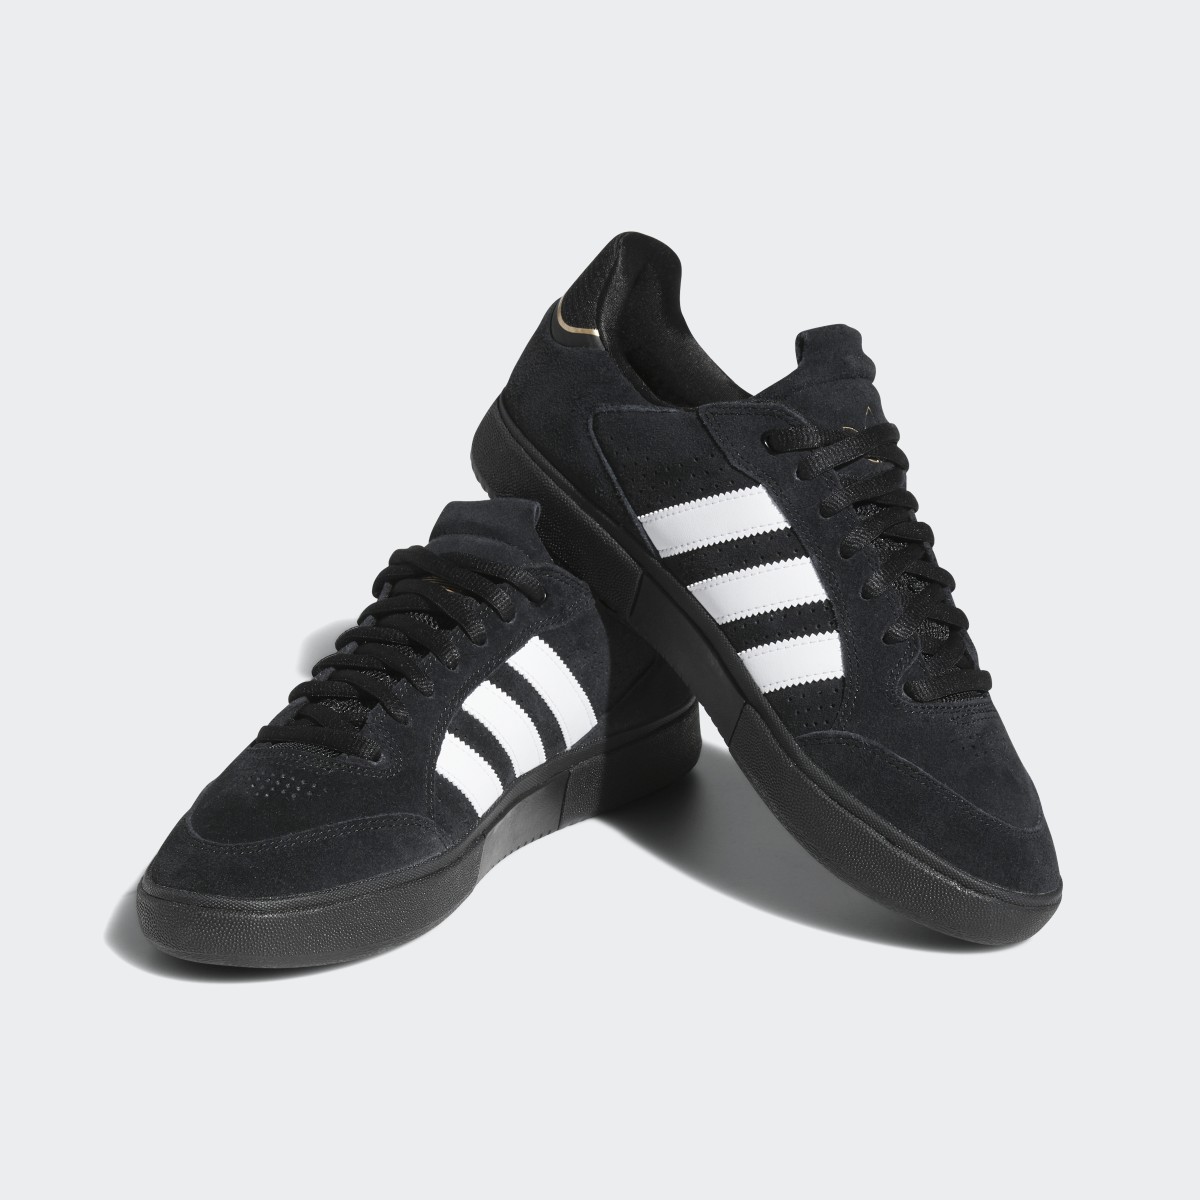 Adidas Tyshawn Low Shoes. 5